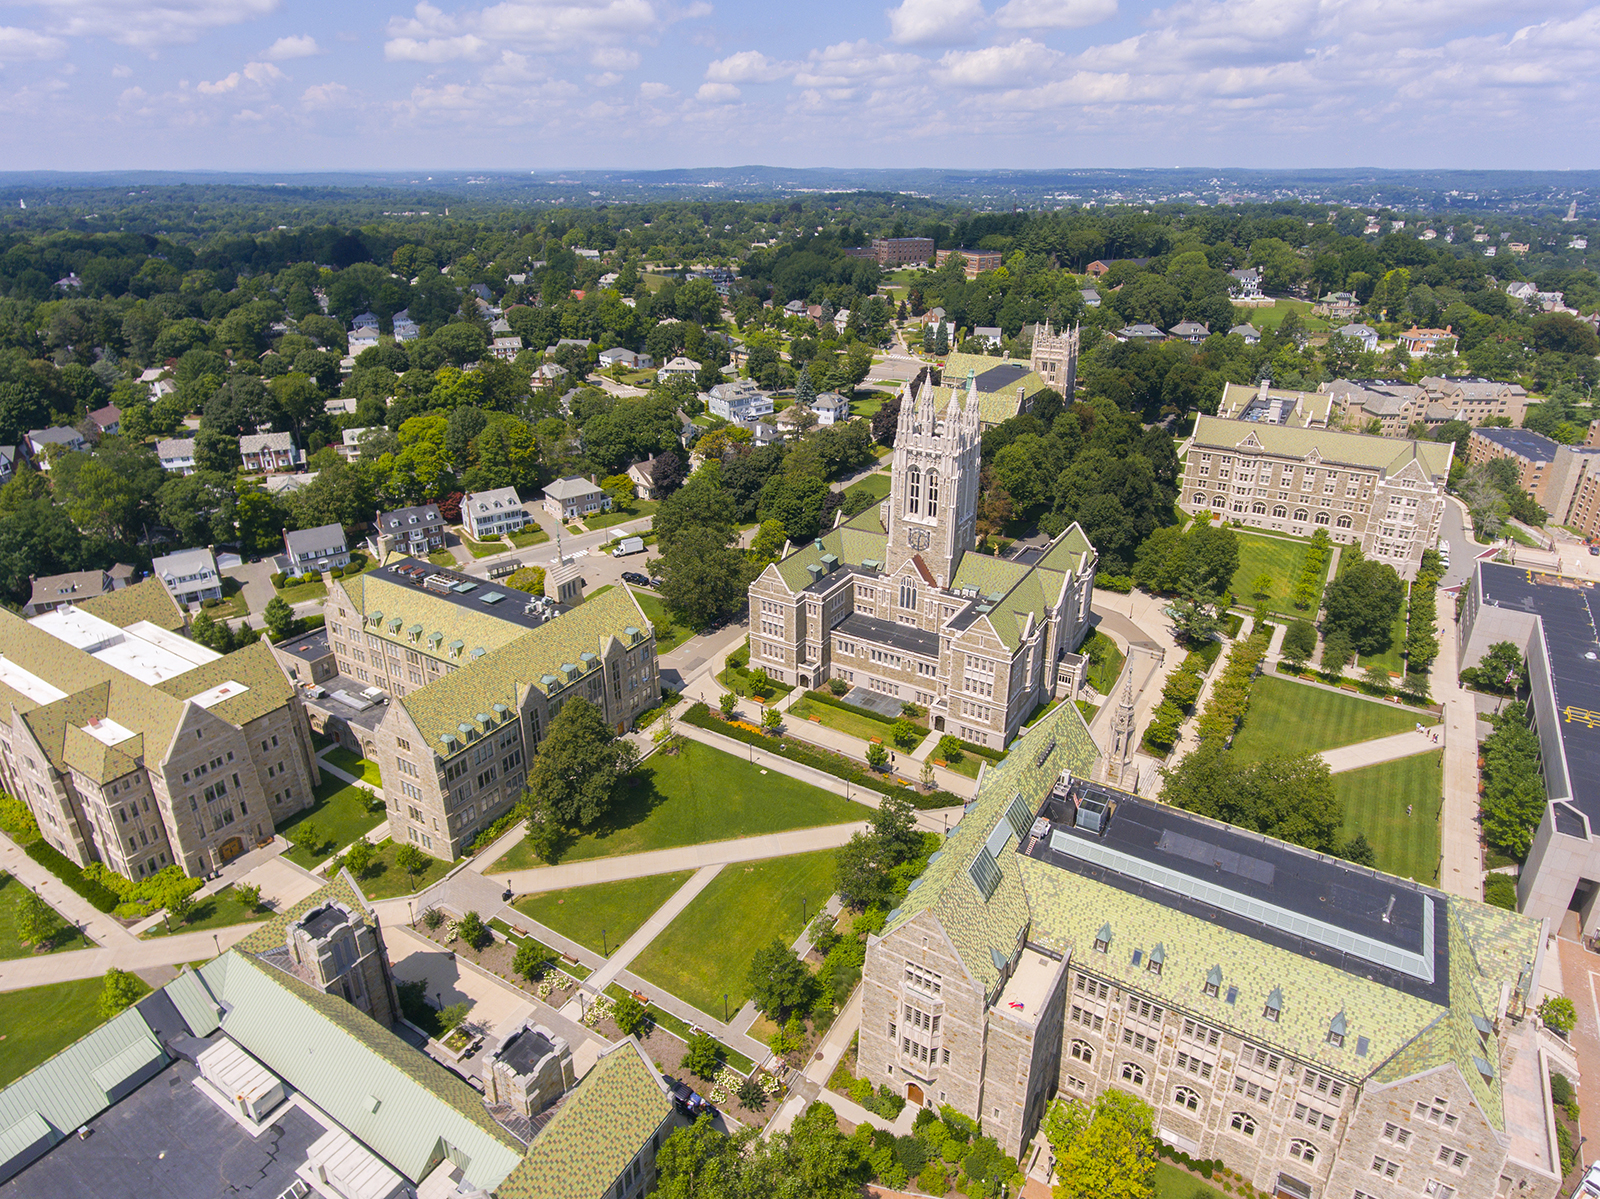 Boston College plans to reopen for on-campus classes at the end of August